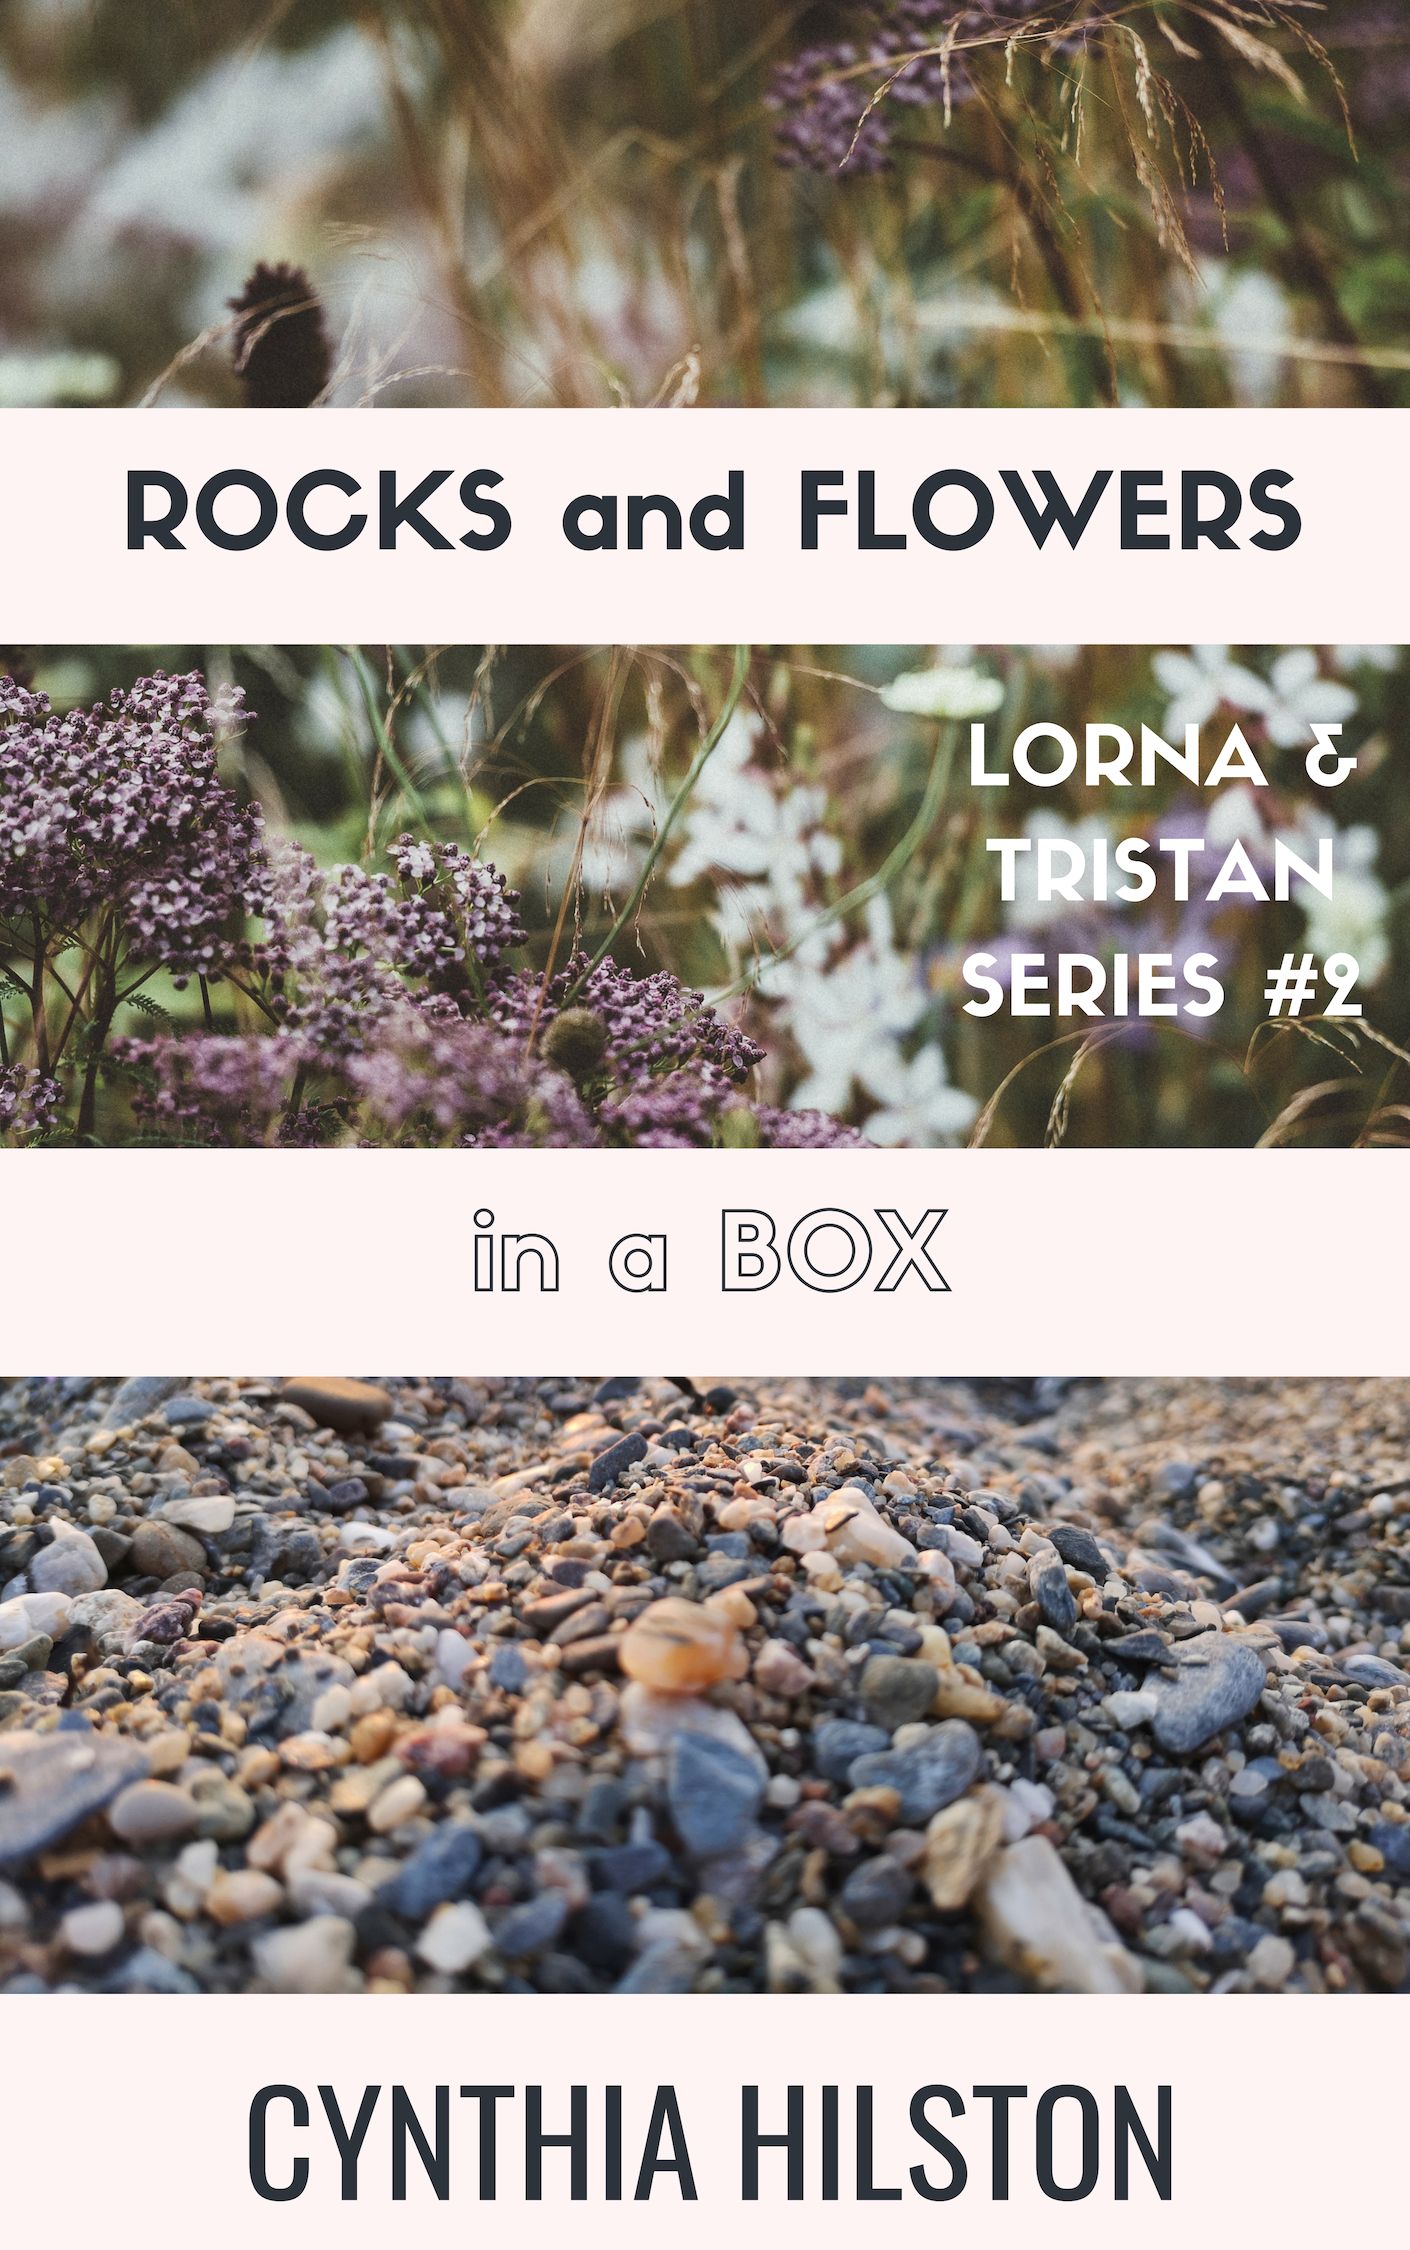 Rocks and Flowers in a Box